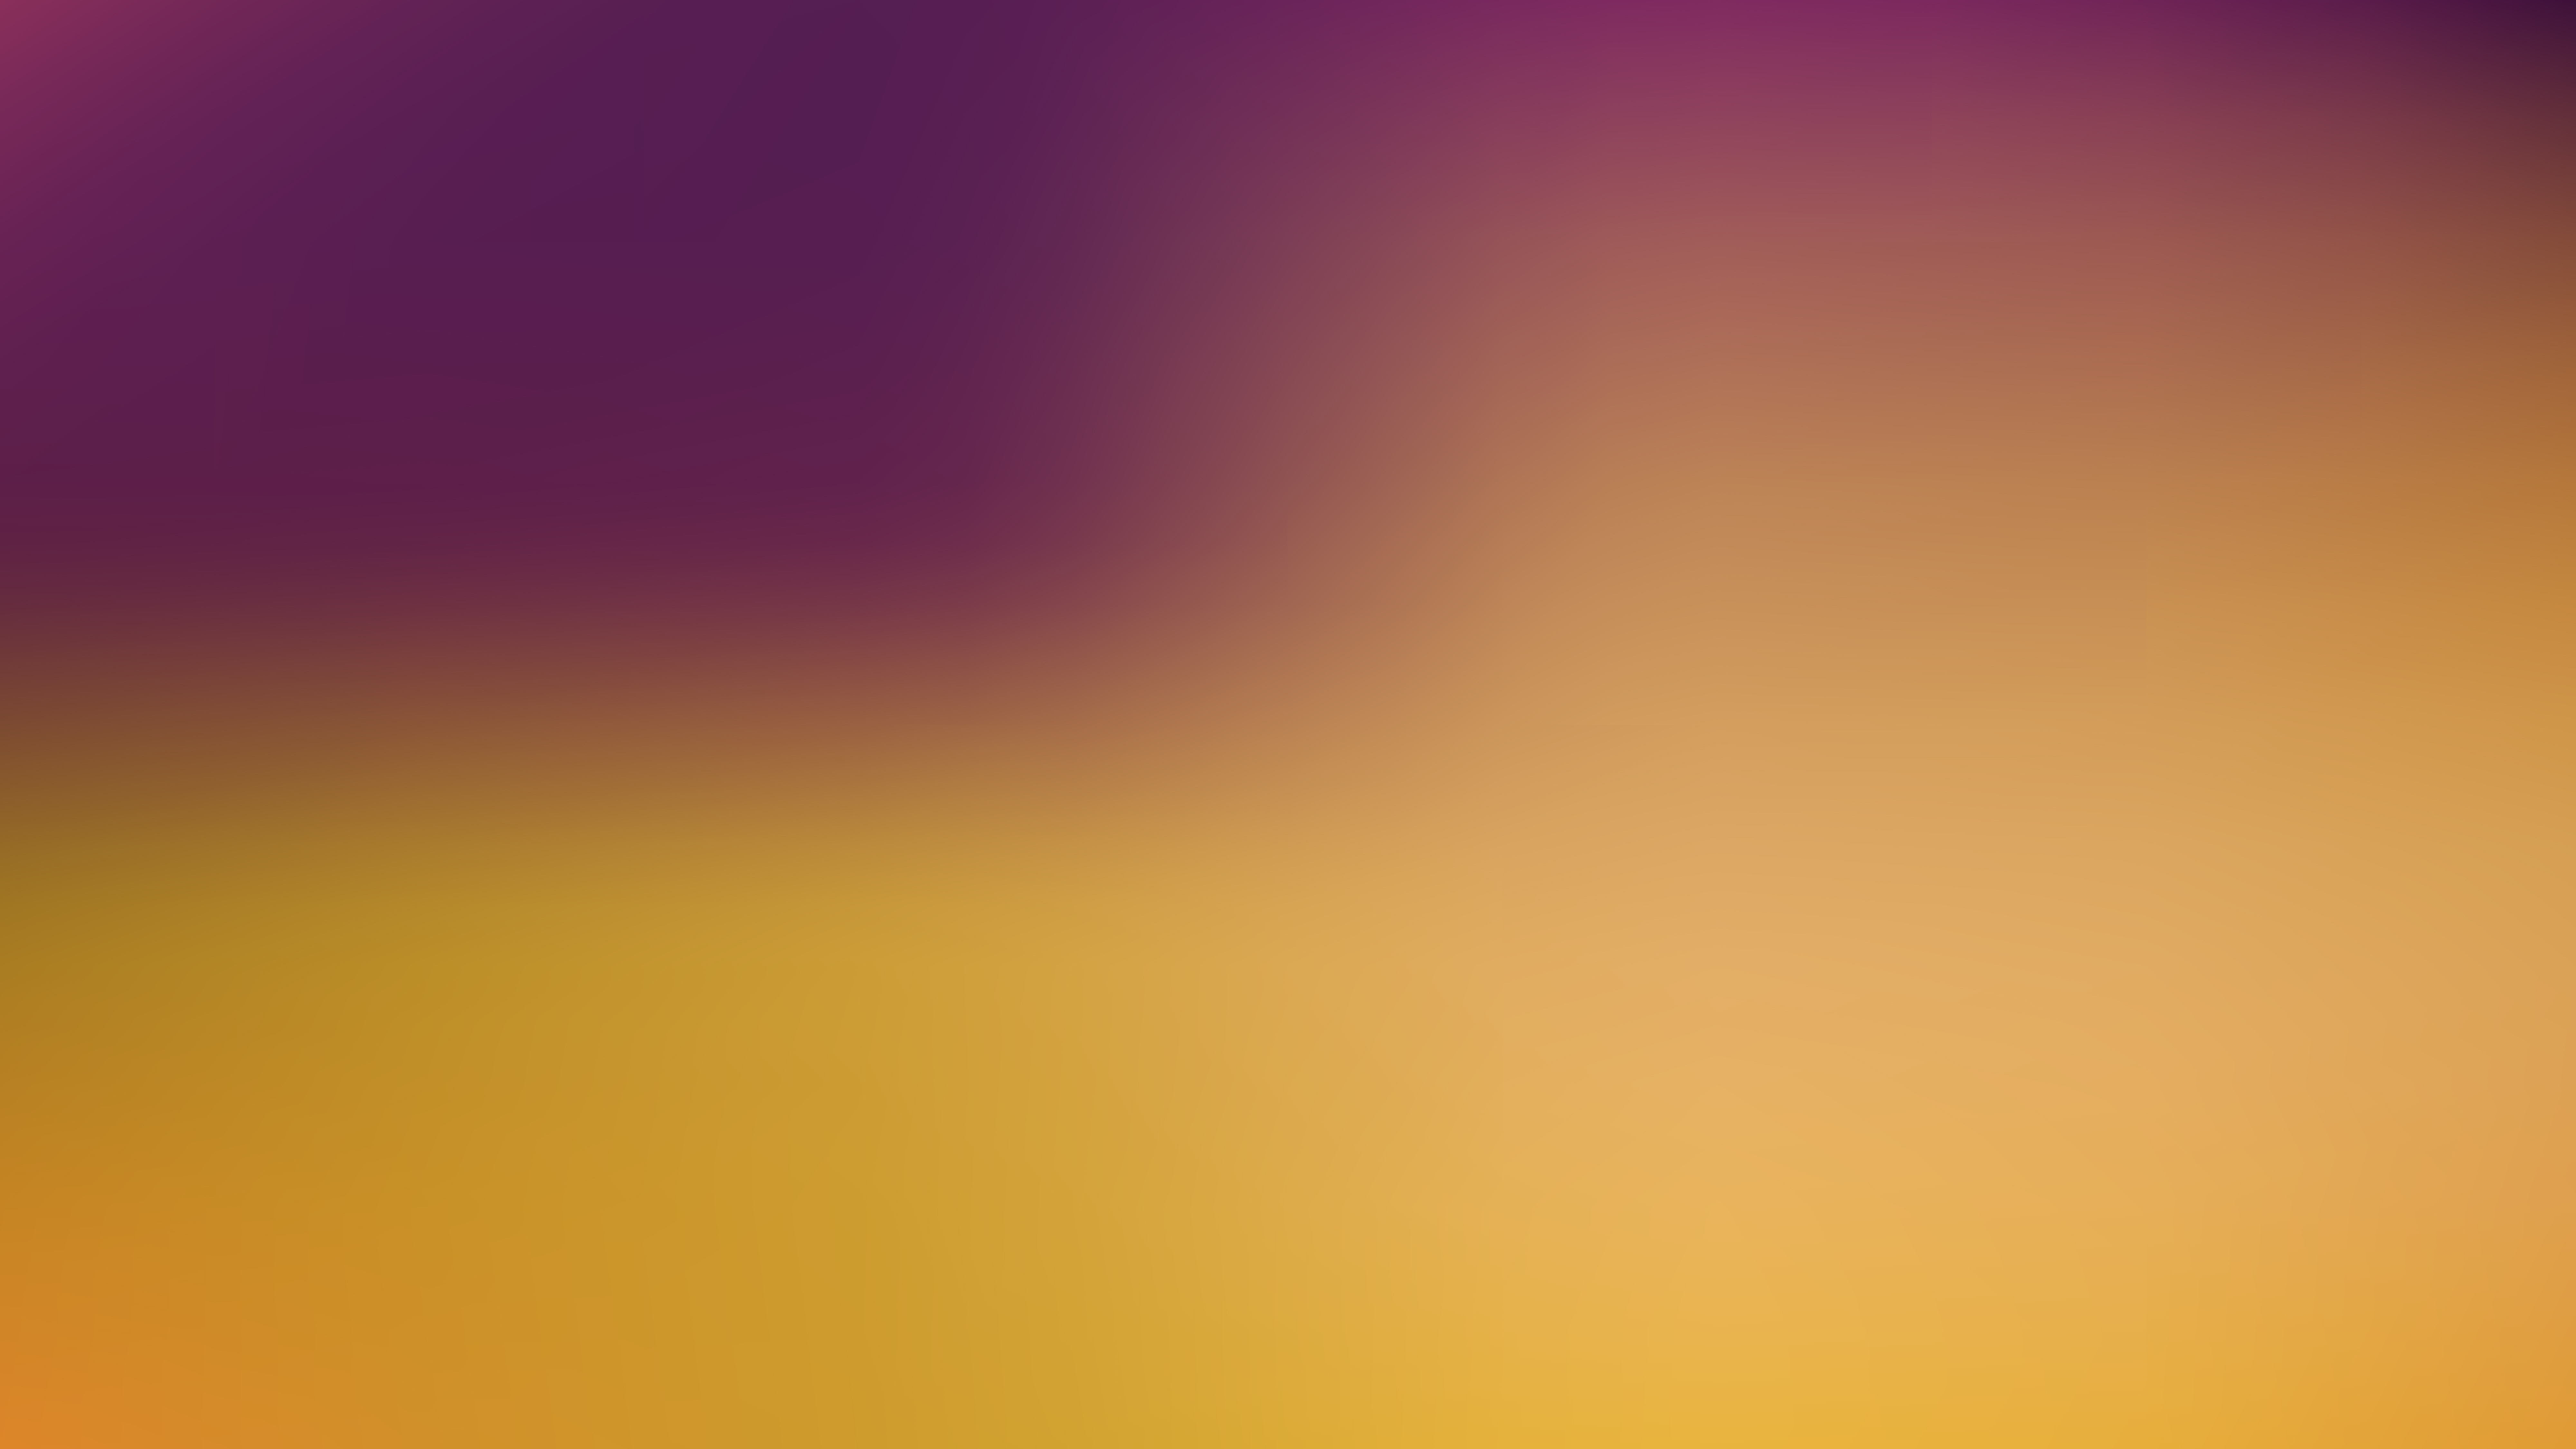 Free Purple and Yellow Blur Background